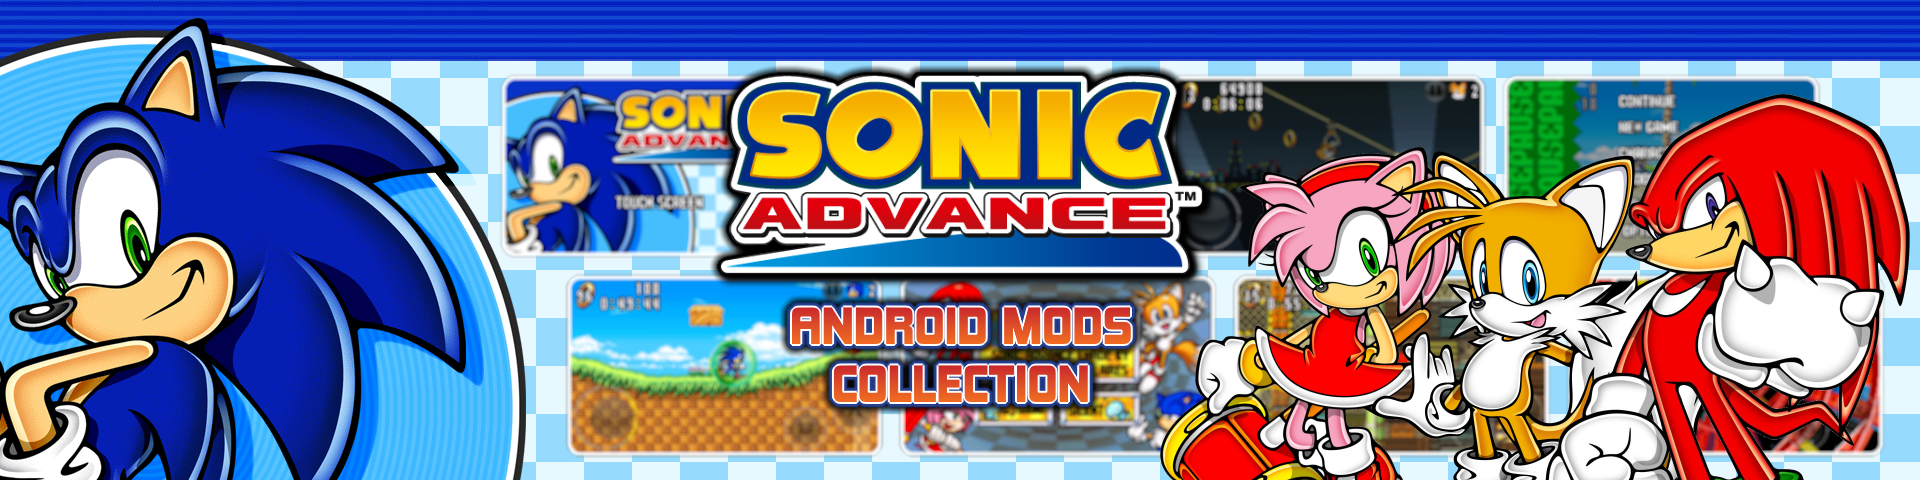 Sonic Advance - Android Mods Collection